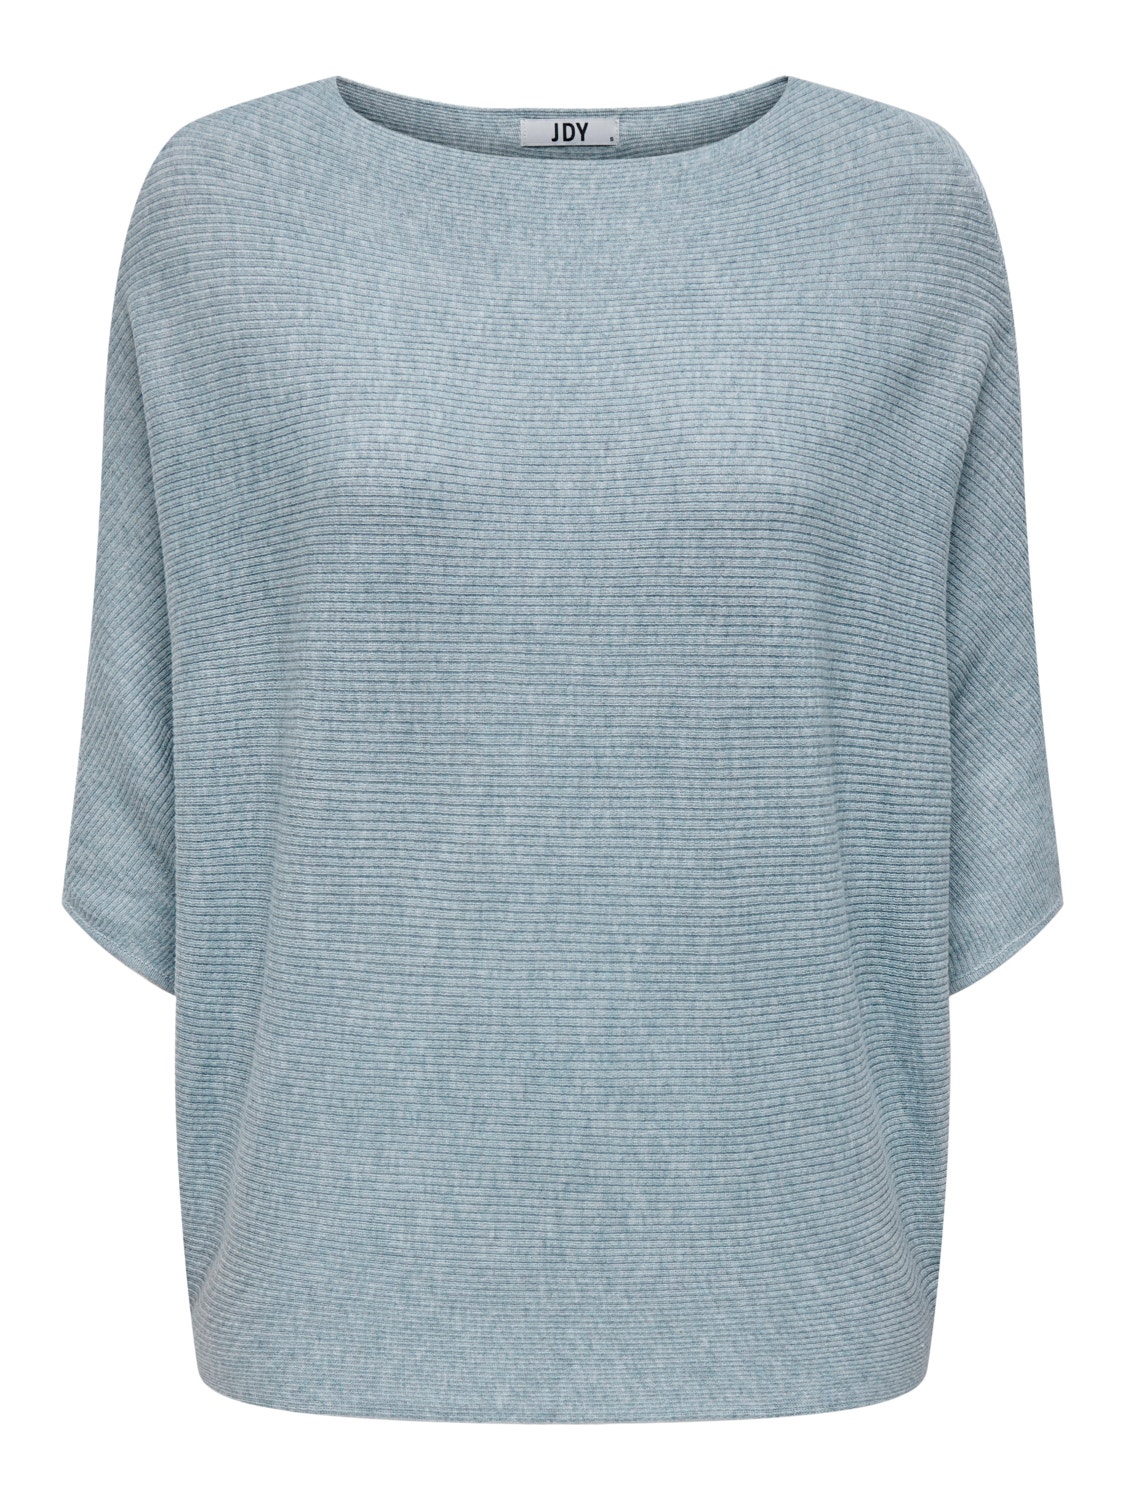 ONLY Tall flagermusærmet Pullover -Blue Fog - 15257847